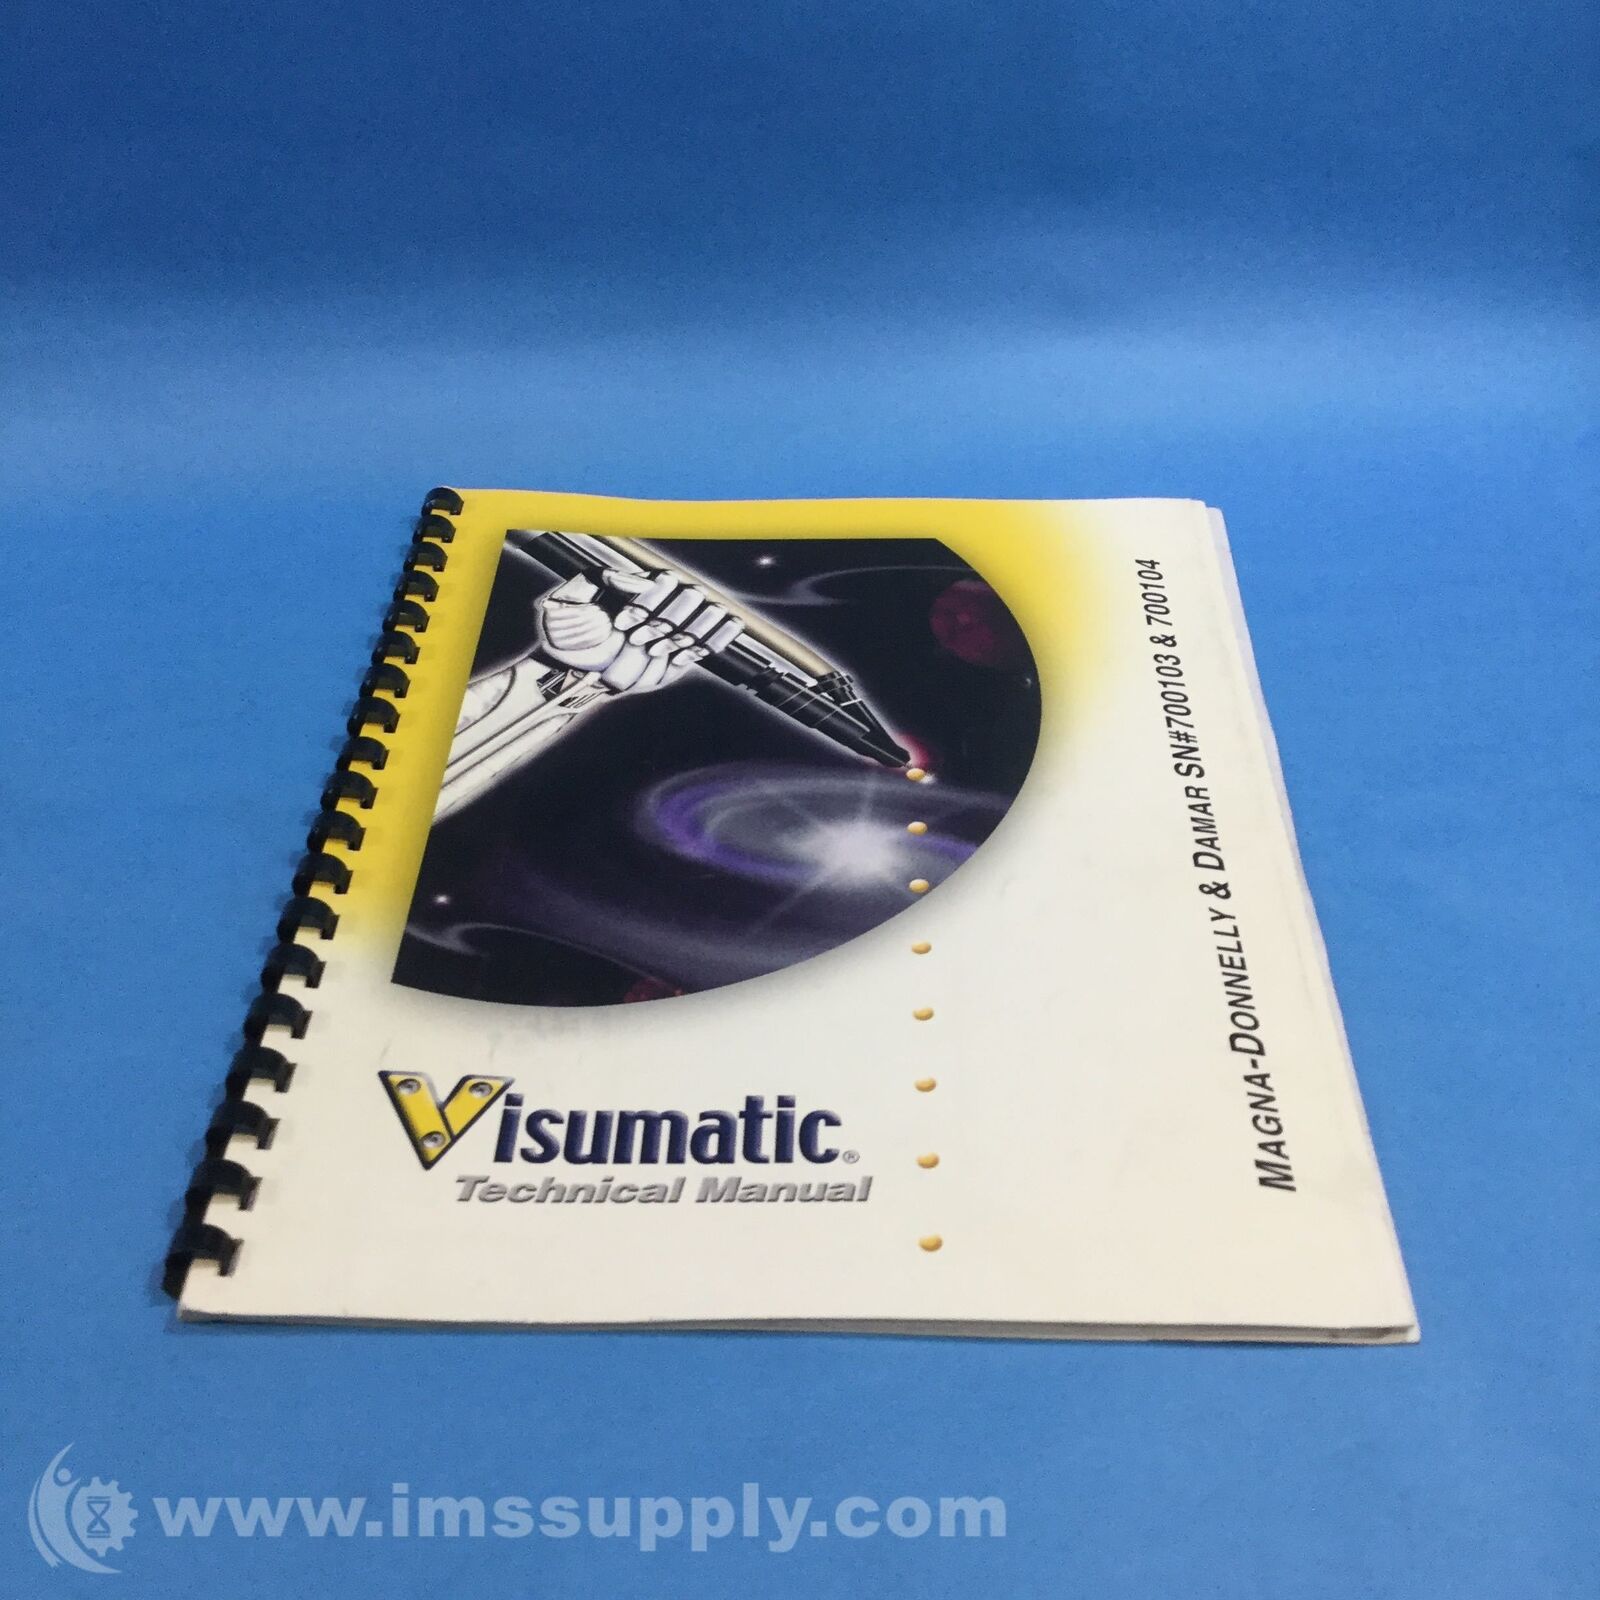 Visumatic Ind Products VSC-900 USIP 2021 spring and summer new Technical Manual Max 40% OFF